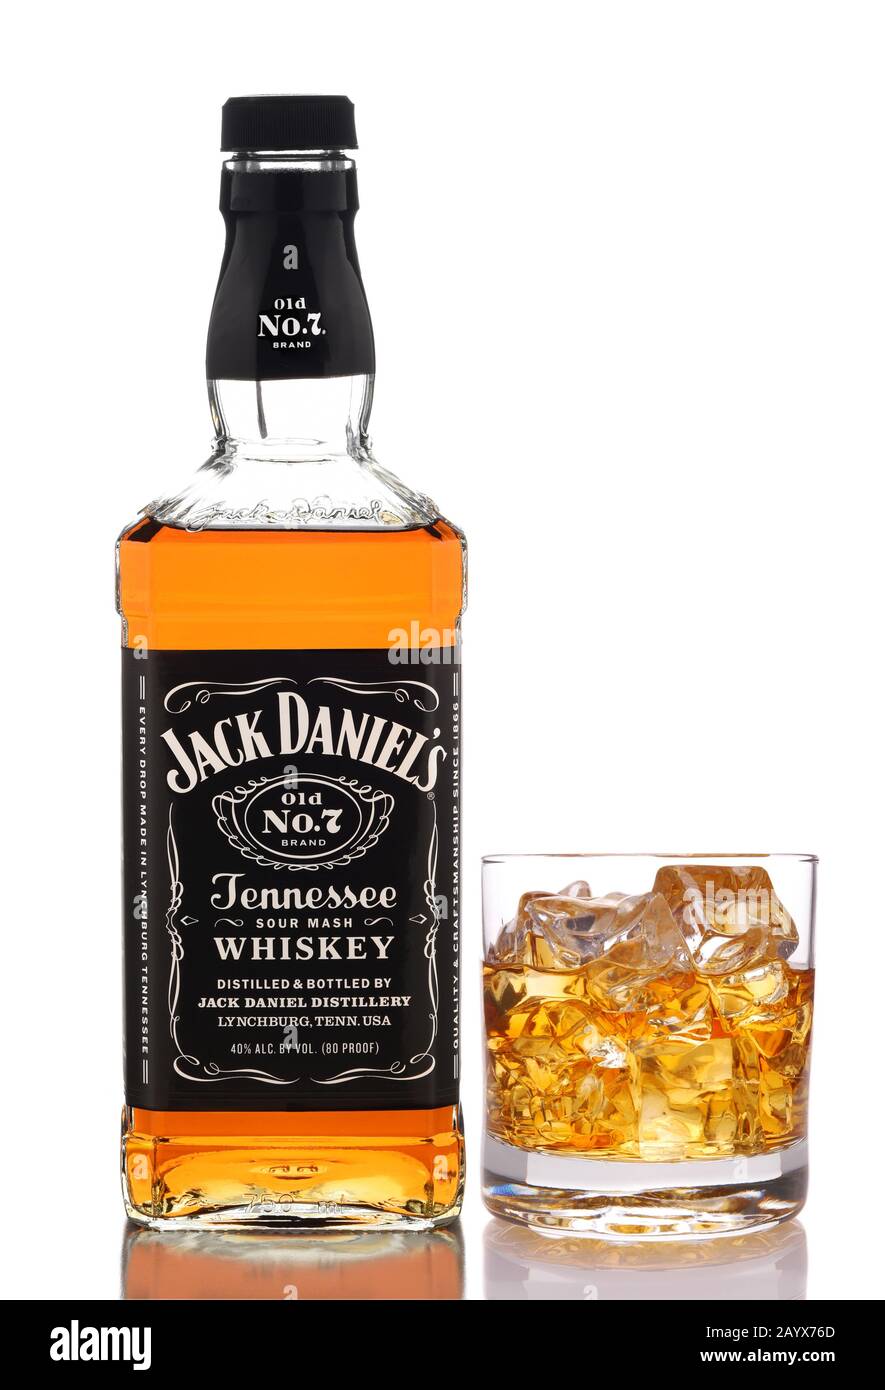 IRVINE, CALIFORNIA - DEC 28, 2018: A bottle of Jack Daniels Tennessee Whiskey, with glass, from Lynchburg, Tennessee, is the top selling American Whis Stock Photo